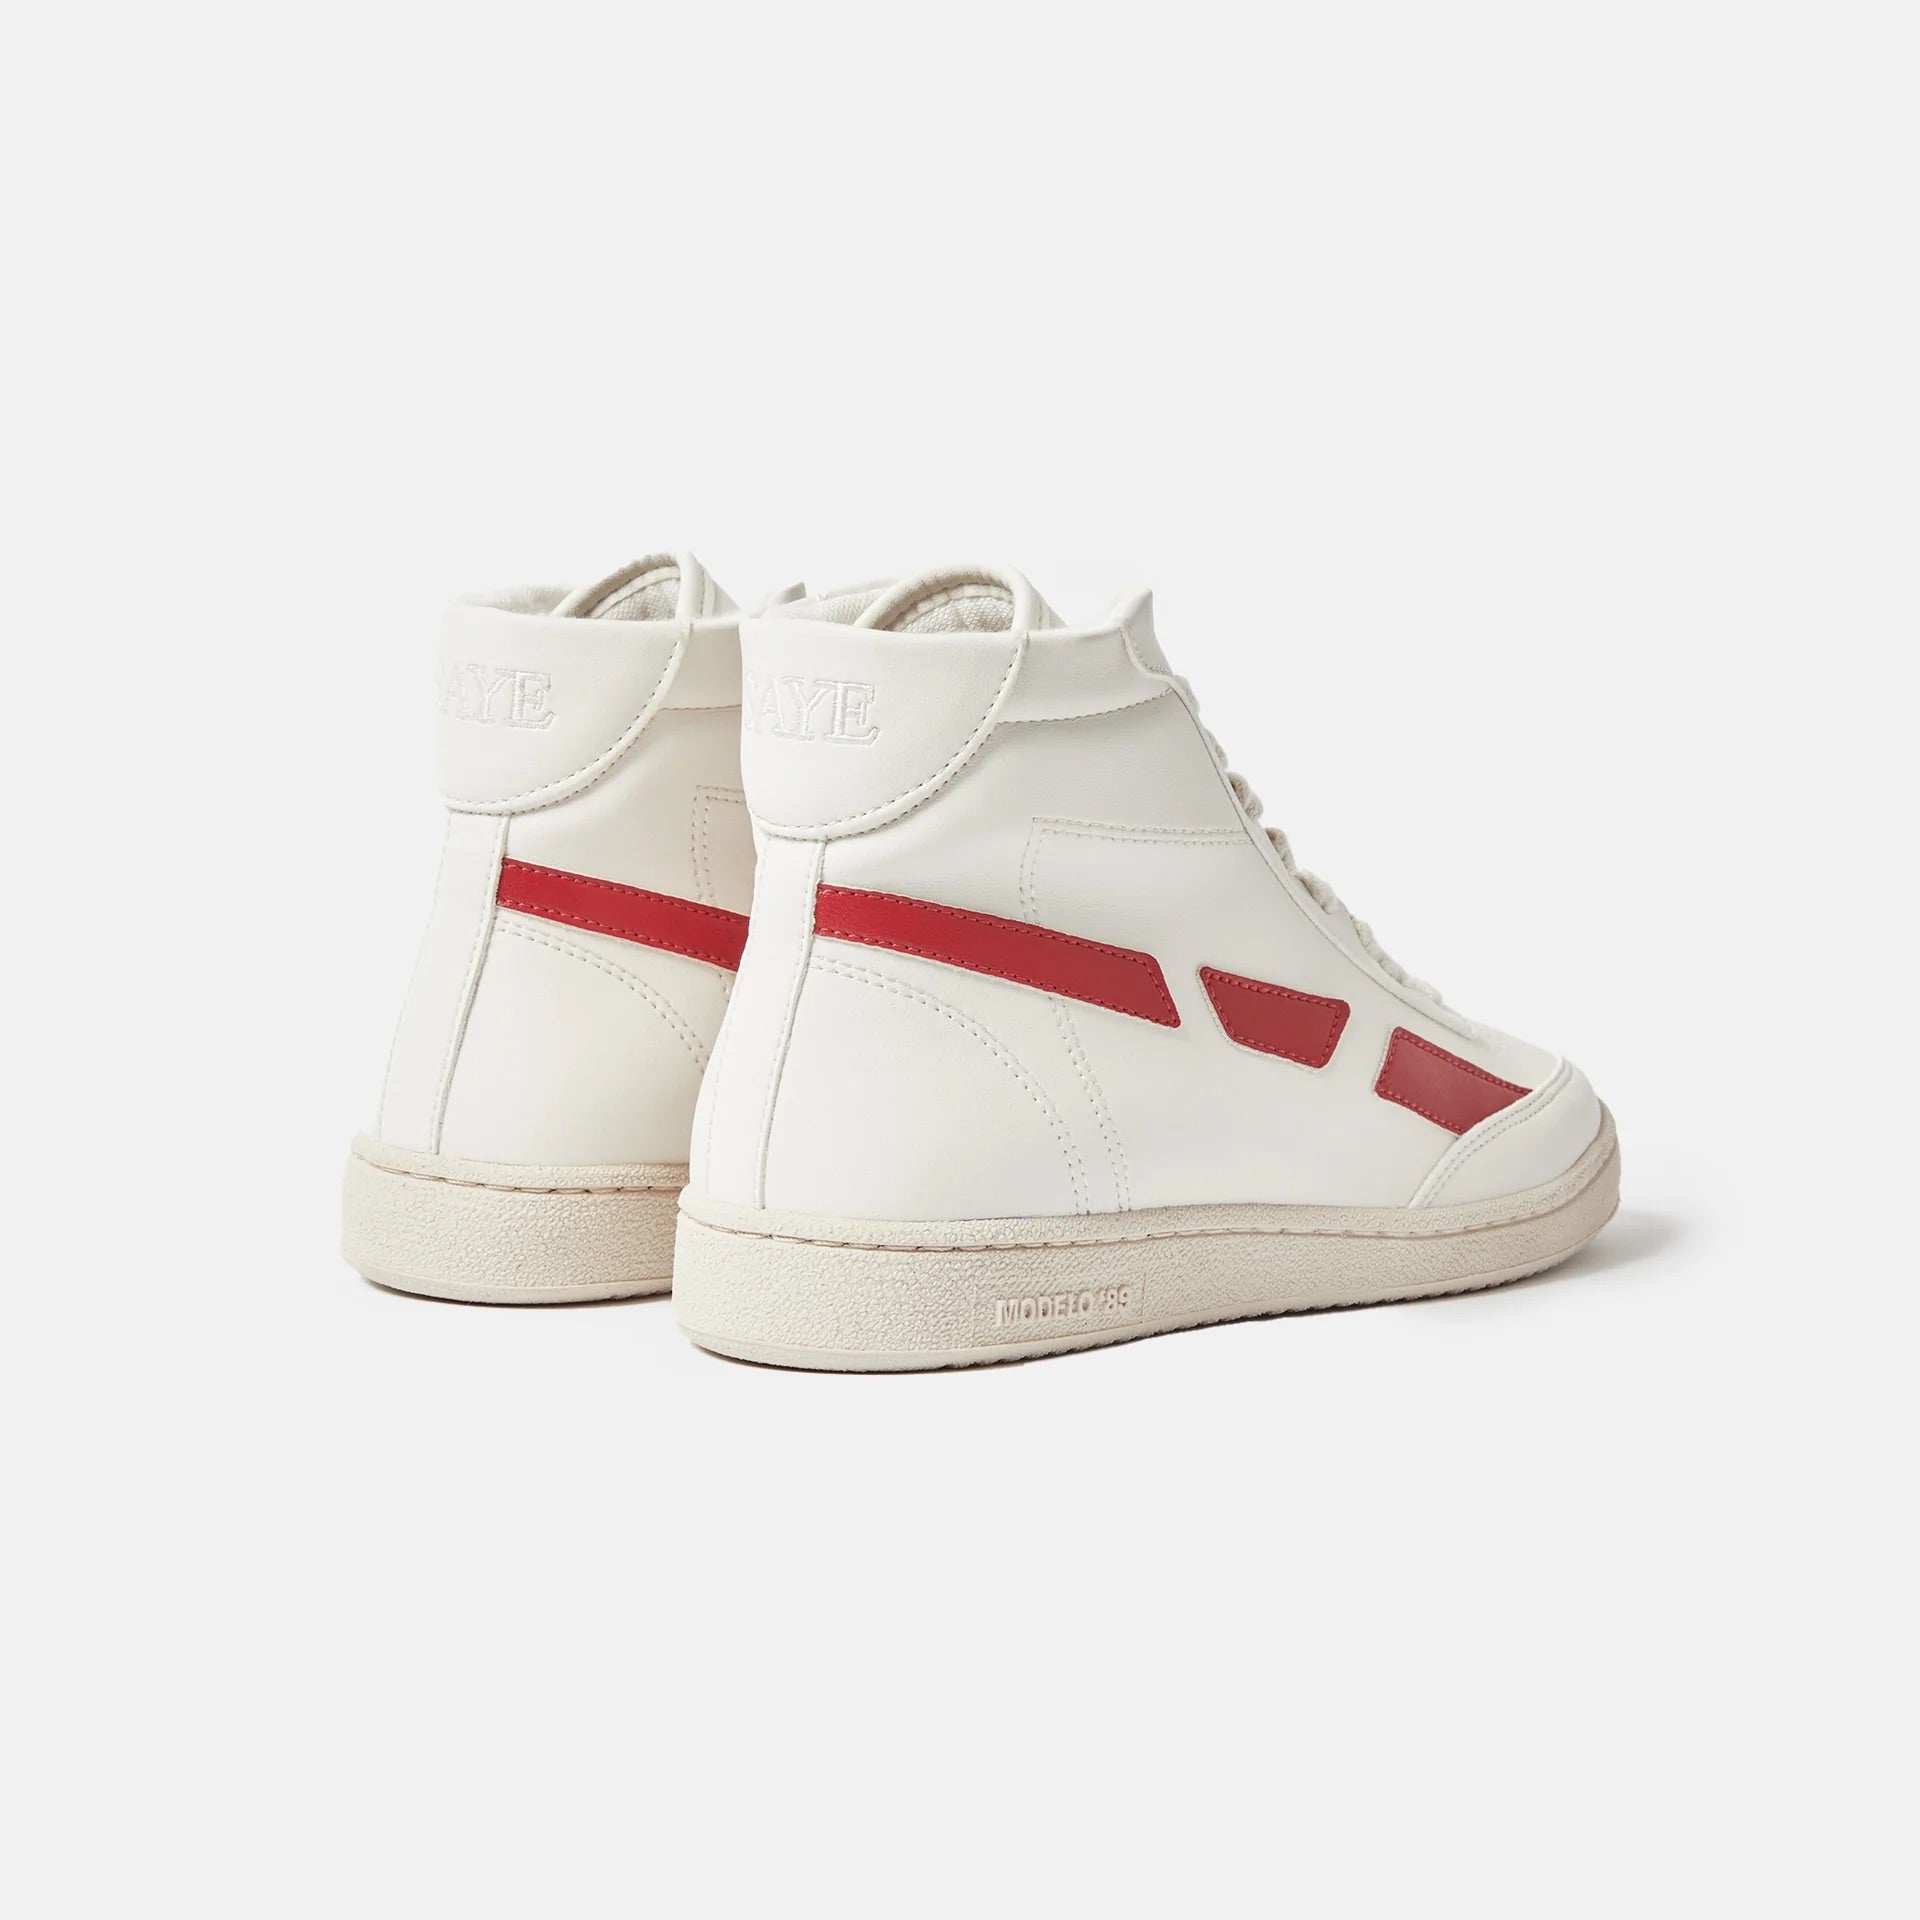 A pair of Modelo '89 Hi Sneakers by SAYE on a white background with vegan leather.